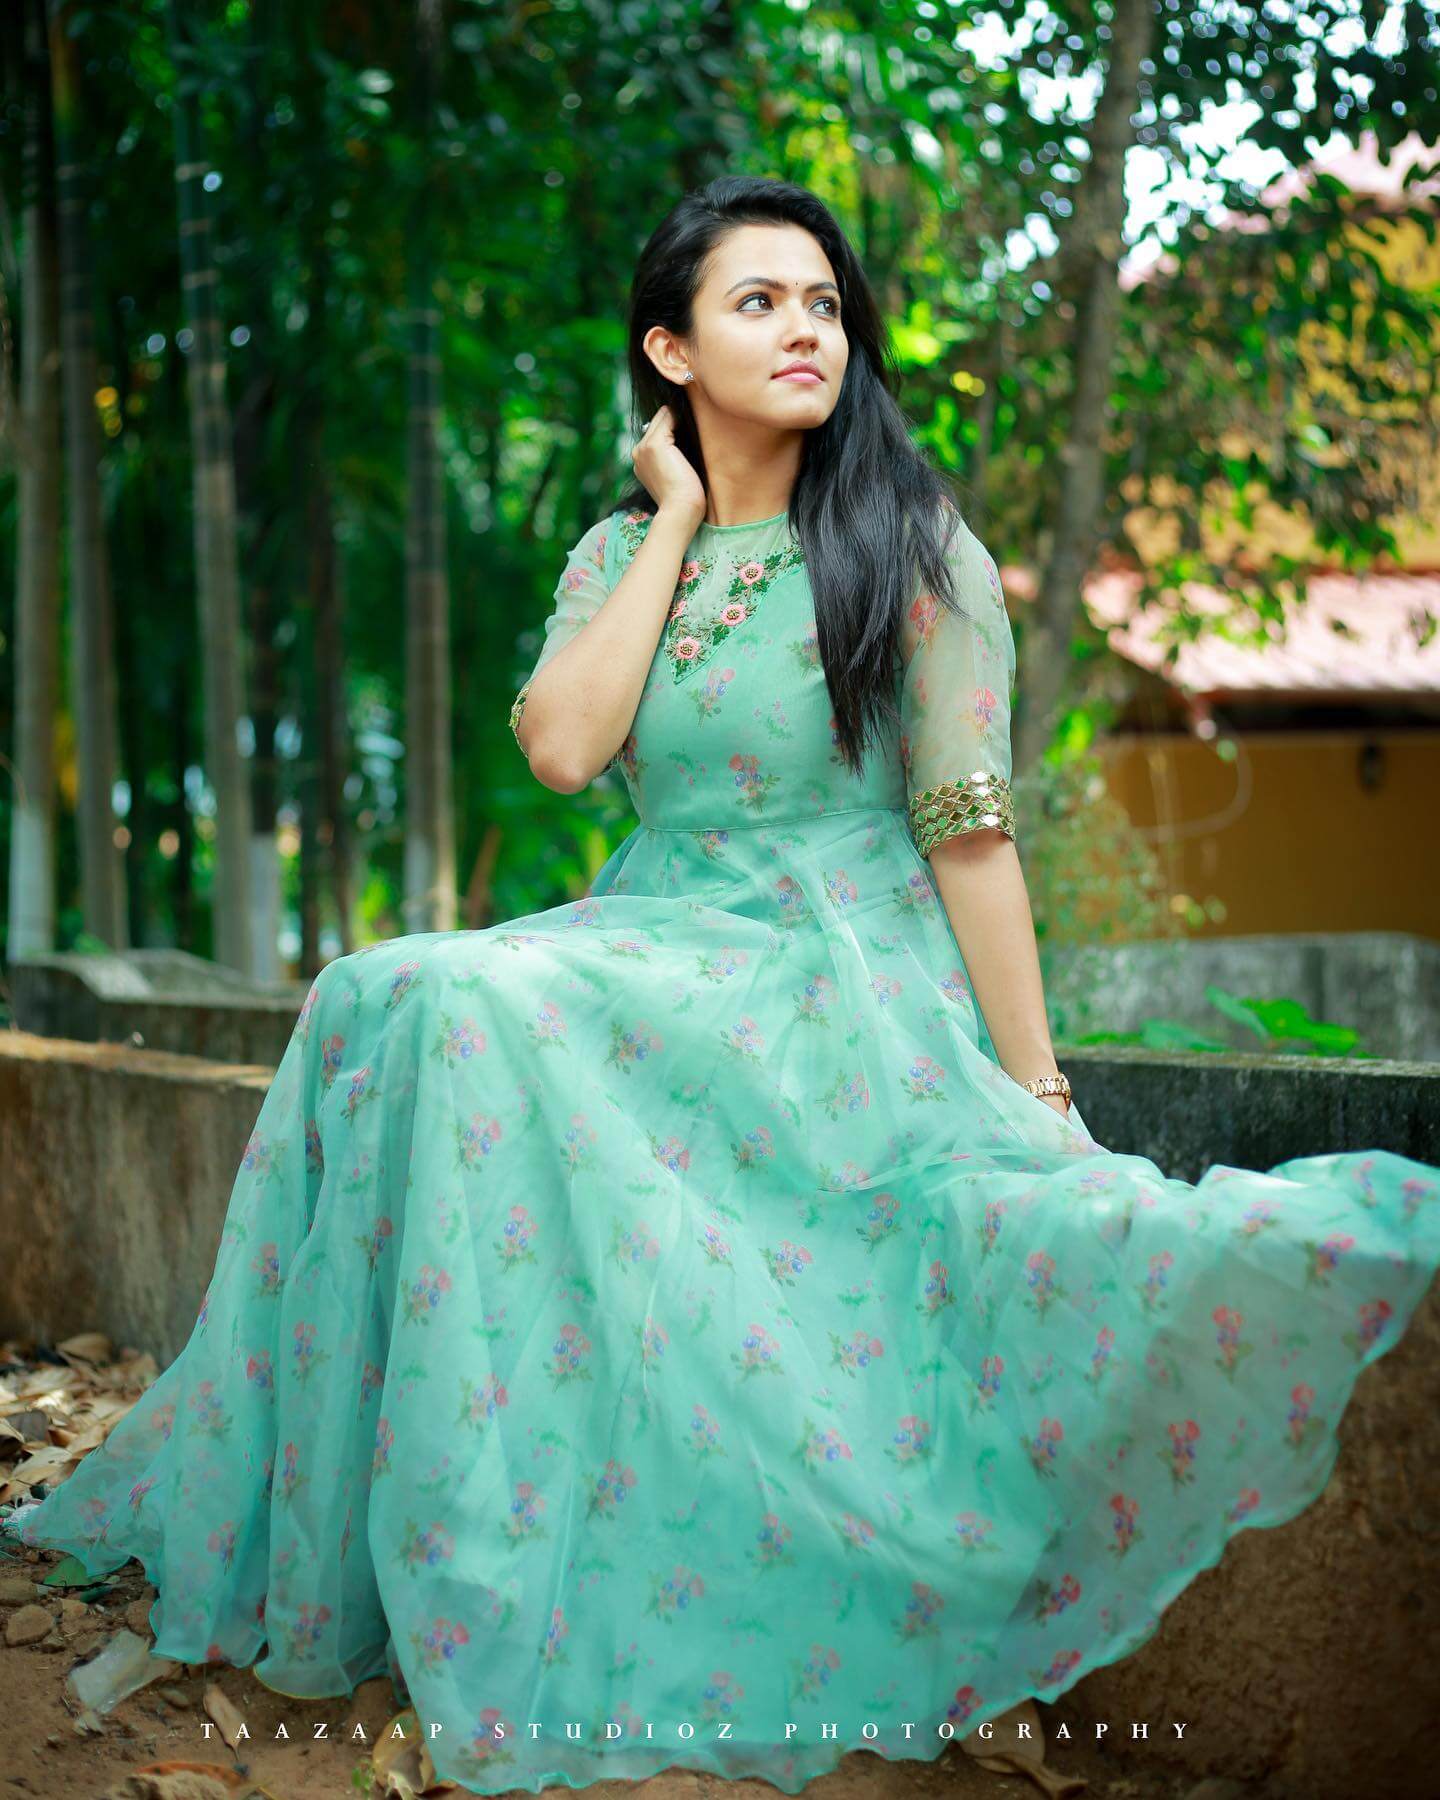 Aparna Das Looks Beautiful In Green Printed Organza Gown - Festive Outfits & Looks